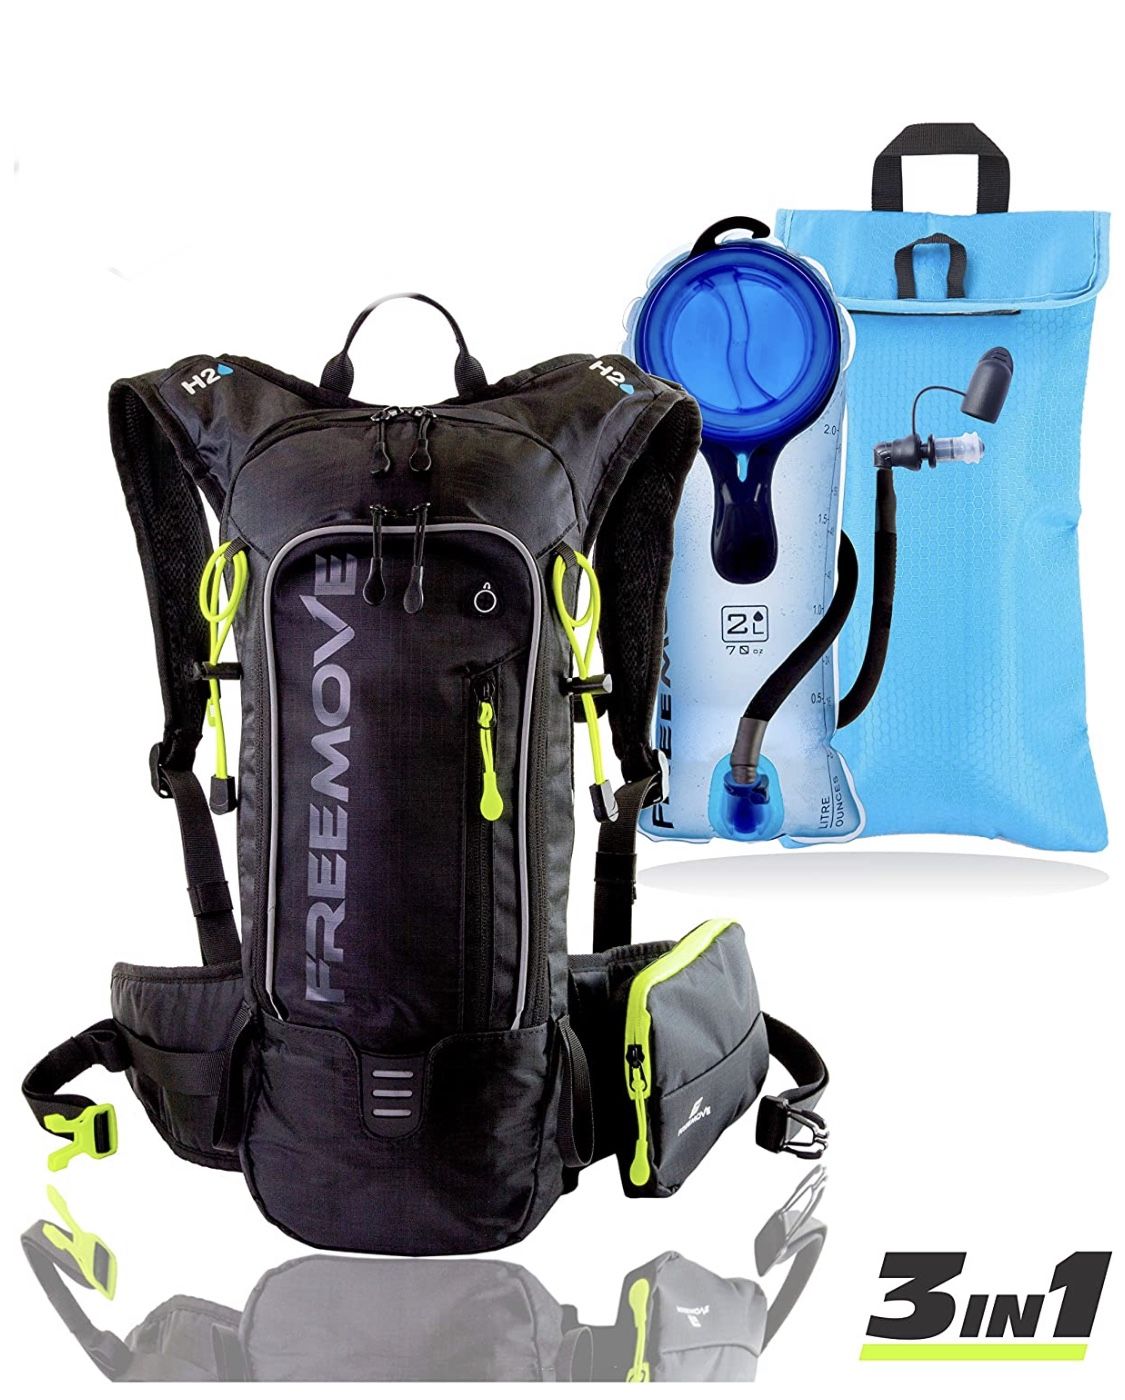 Hydration Pack Backpack with 2 Liter Water Bladder and Cooler Bag,